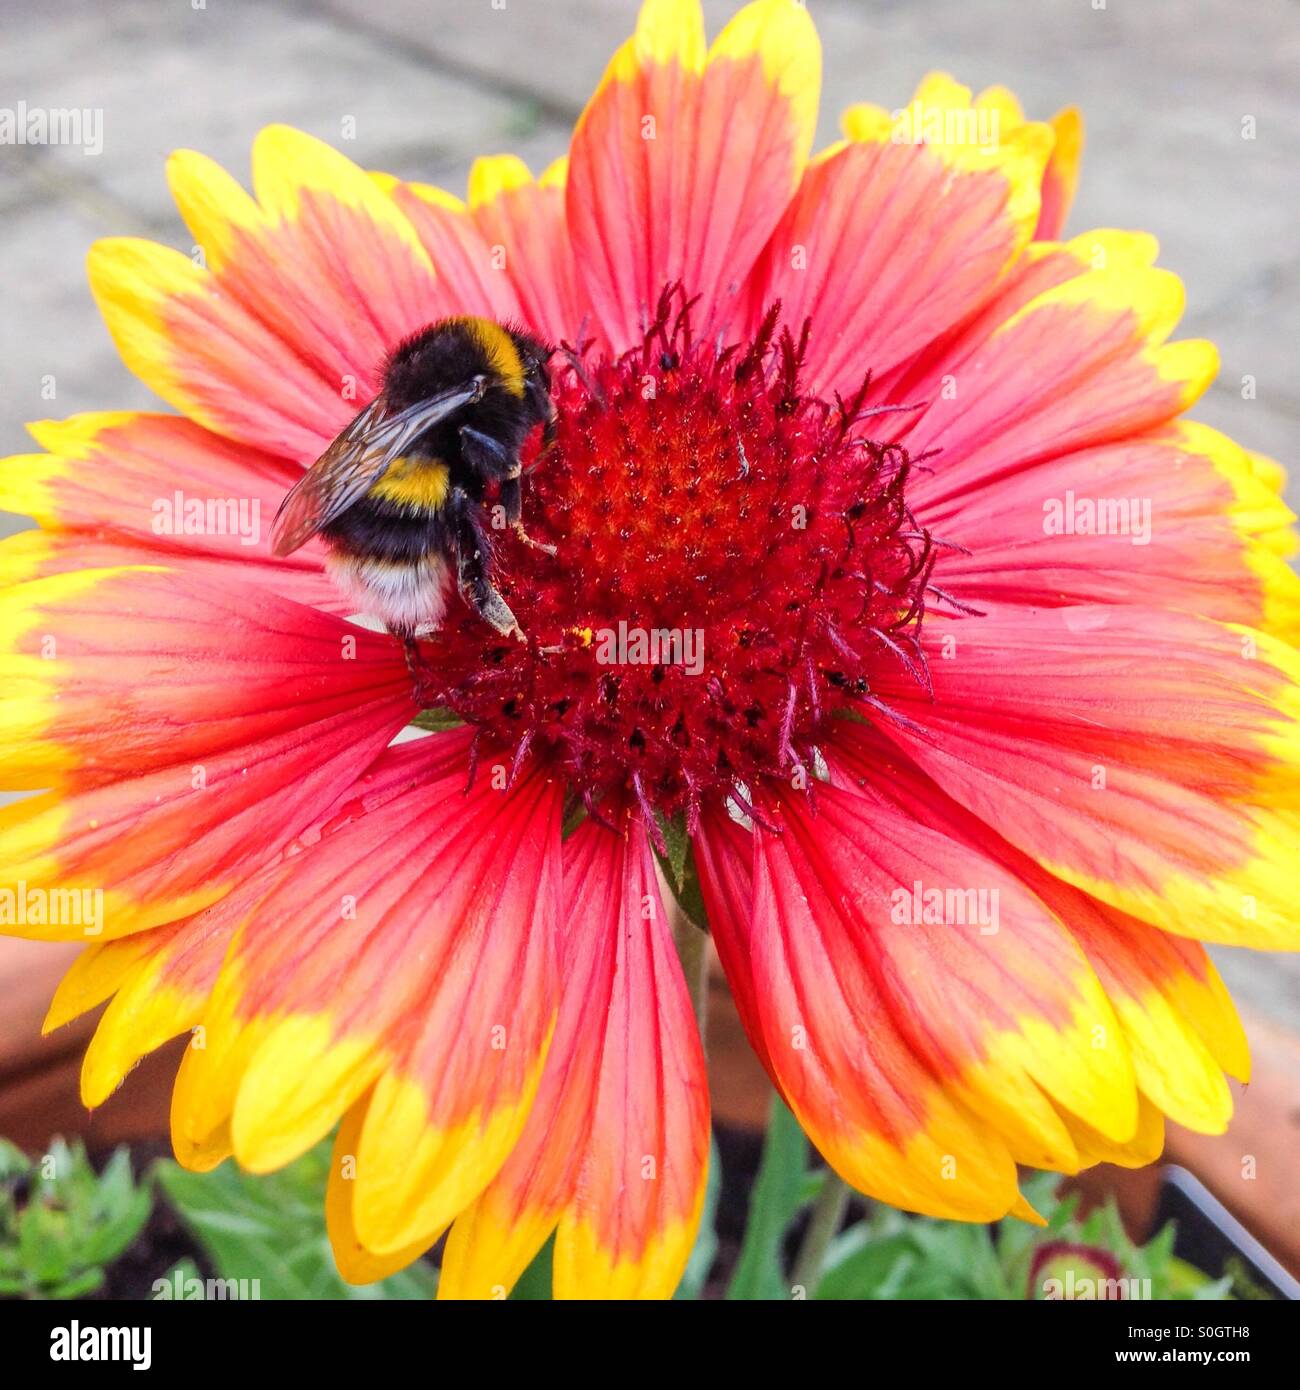 Bumble Bee on yellow and red  gaillardia flower Stock Photo